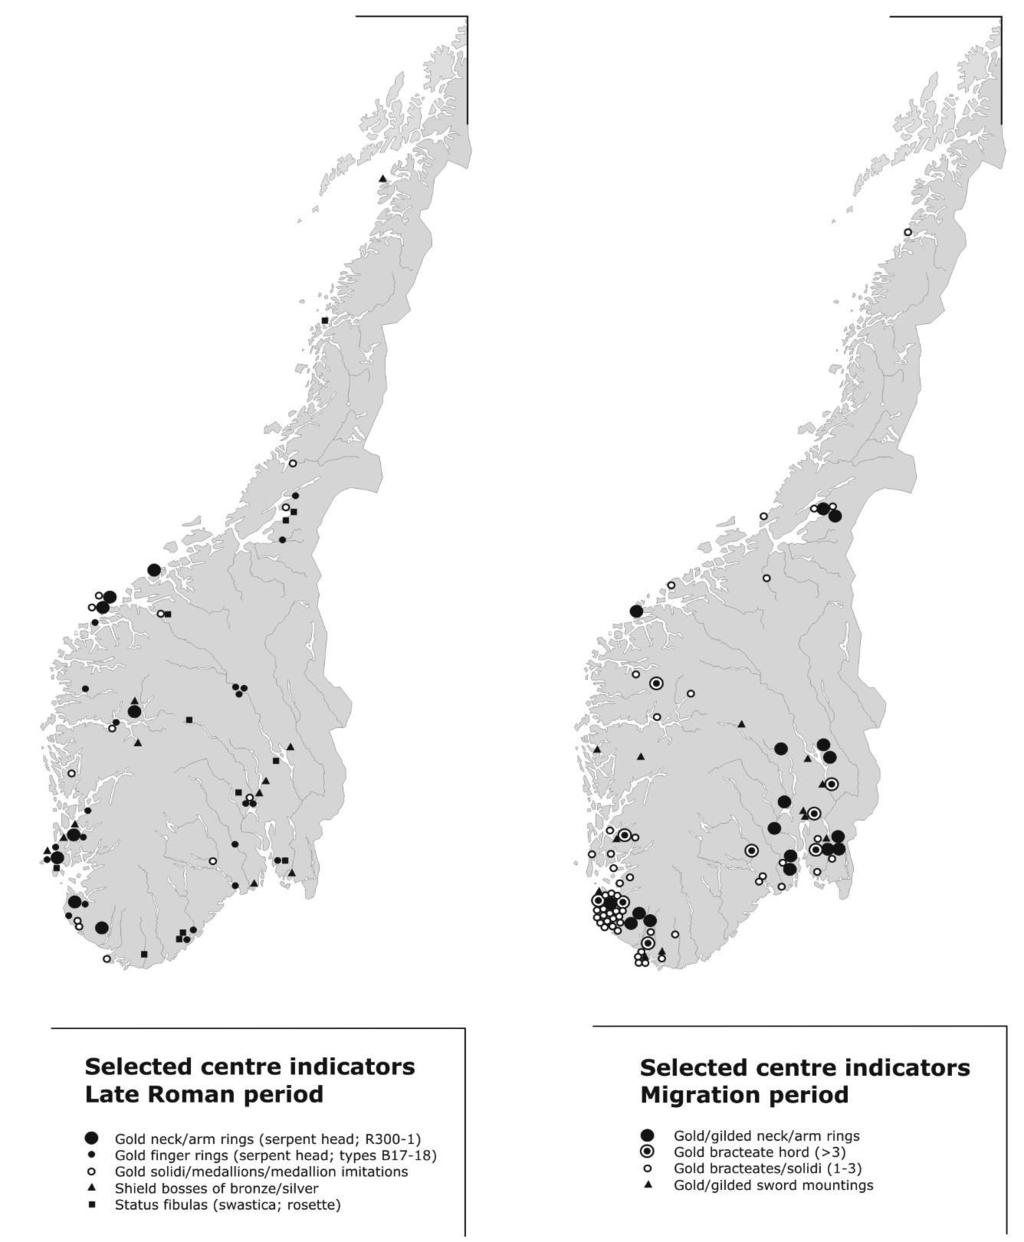 320 Fig. 8.1. Selected centre indicators of the late Roman and Migration periods in Norway. A few gold arm rings are not shown on the map due to an unspecified find spot.